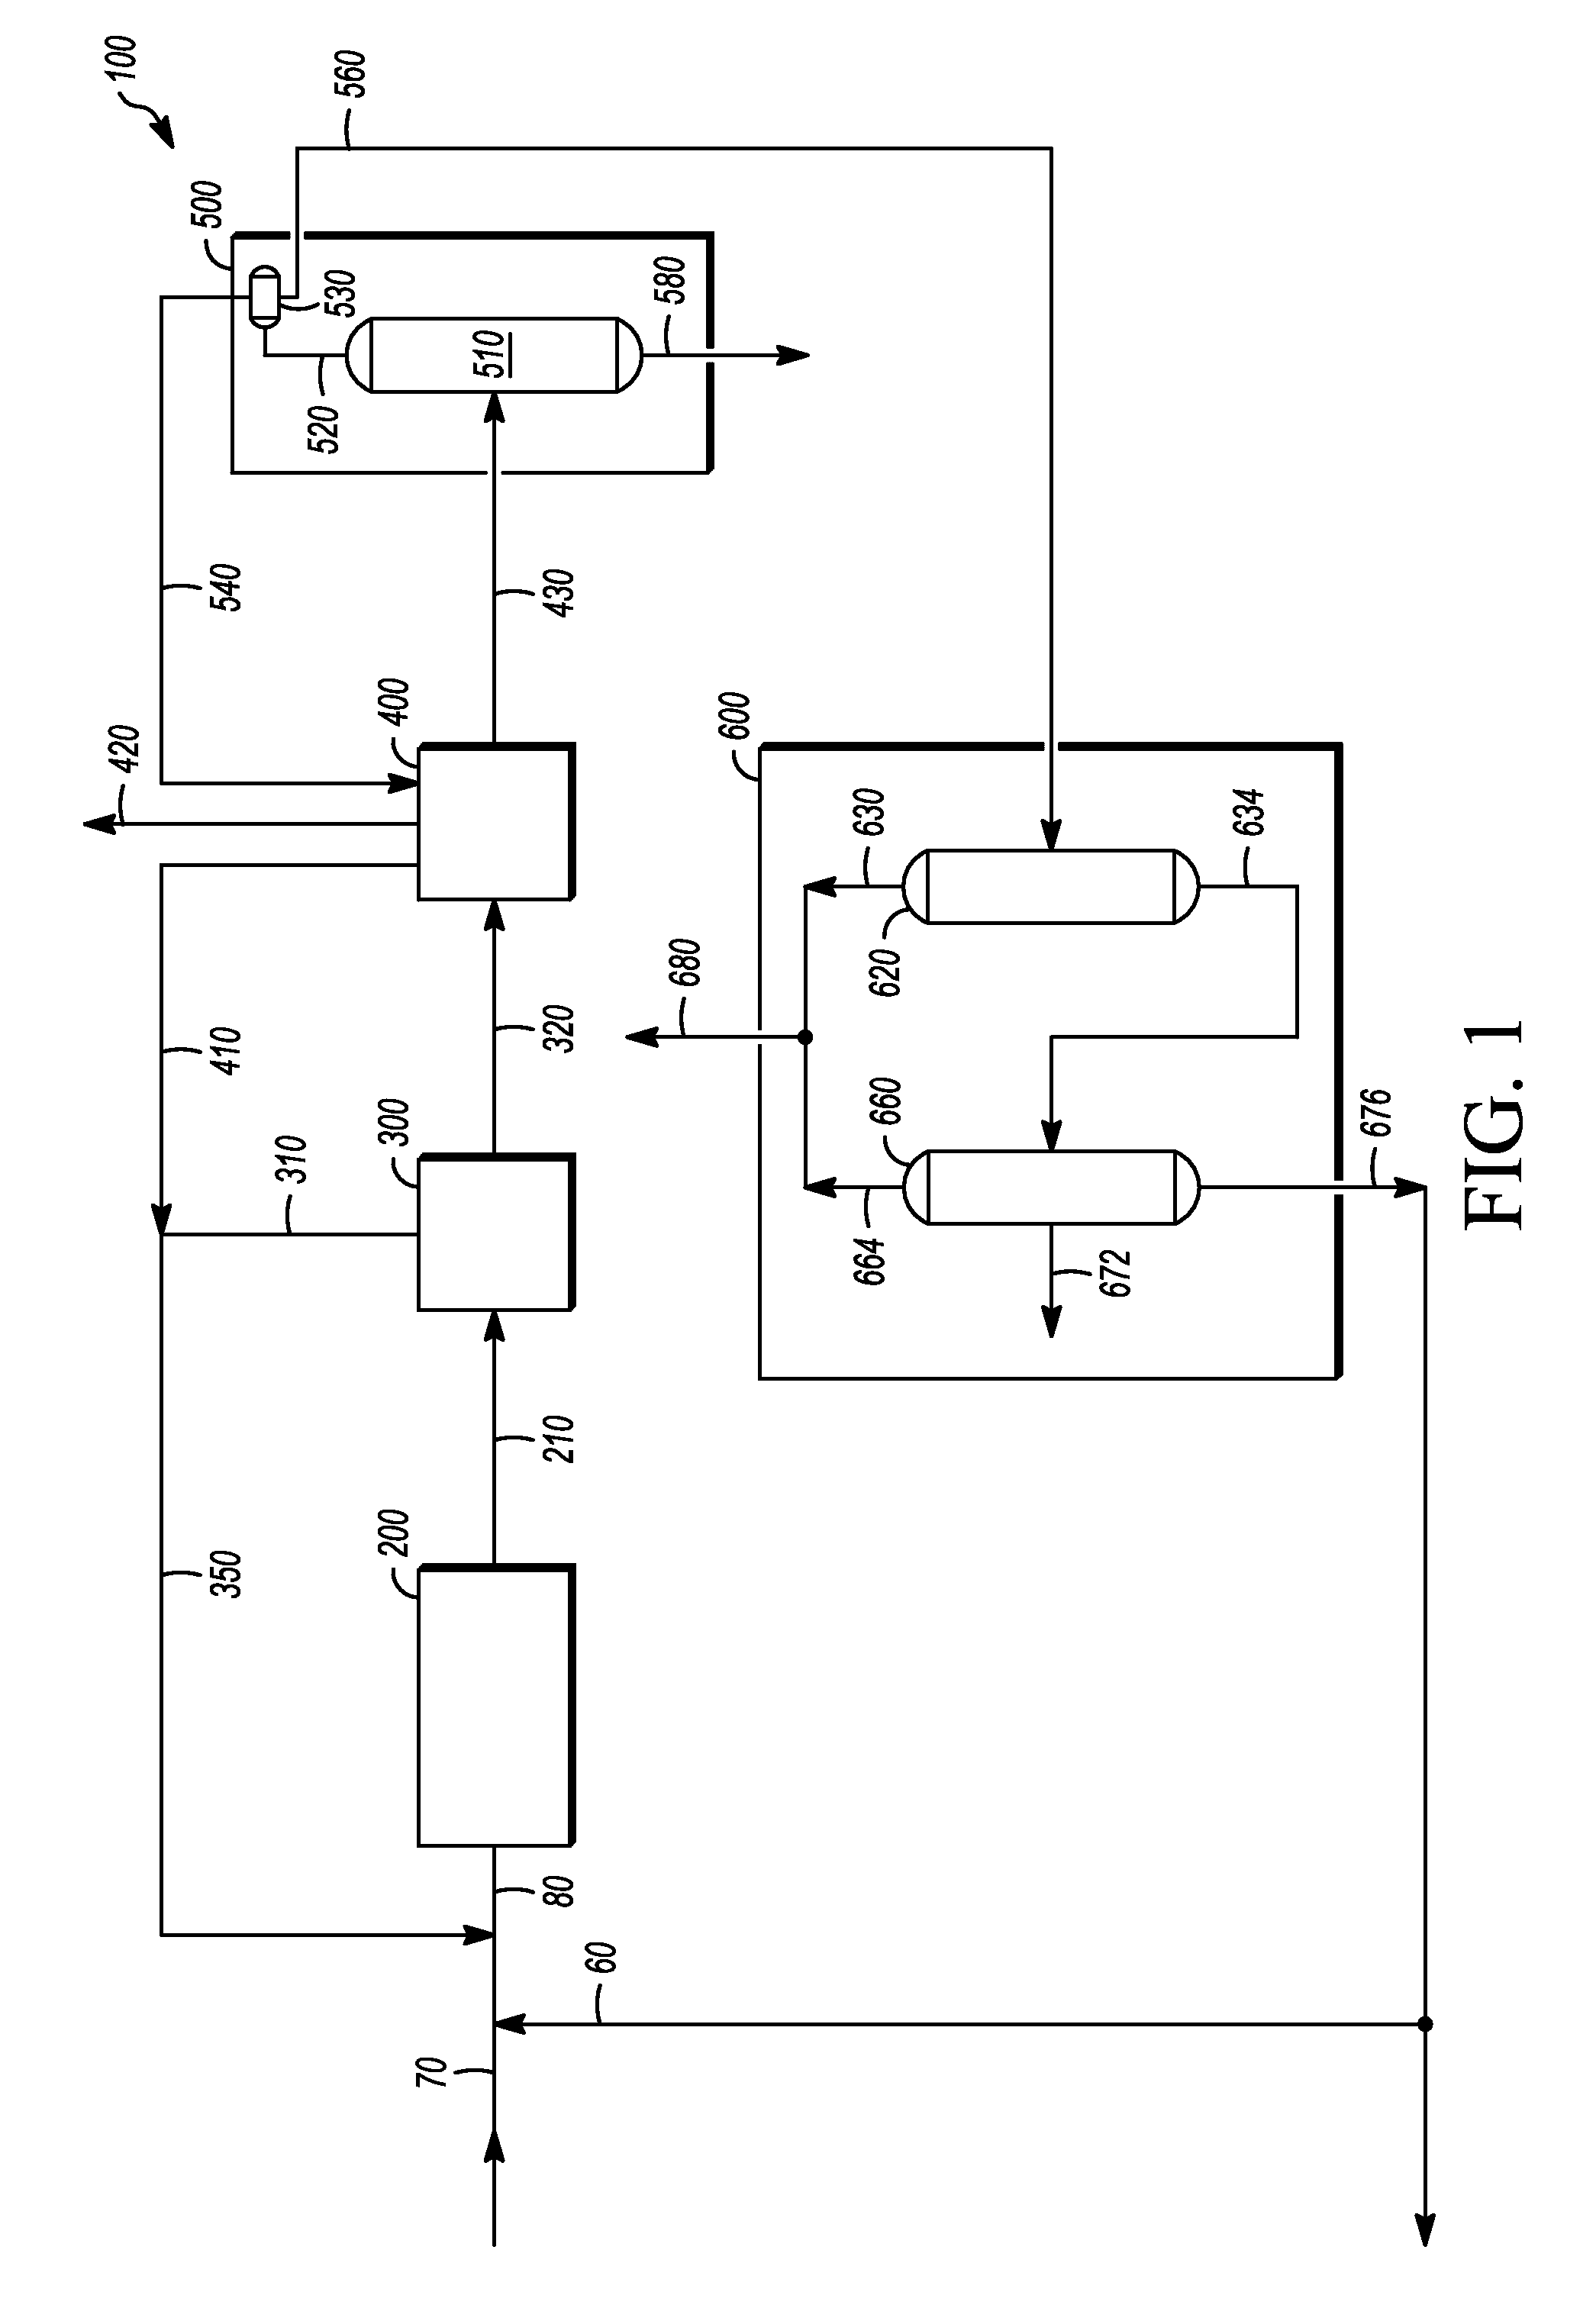 PROCESS AND APPARATUS FOR PRODUCING A REFORMATE BY INTRODUCING n-BUTANE